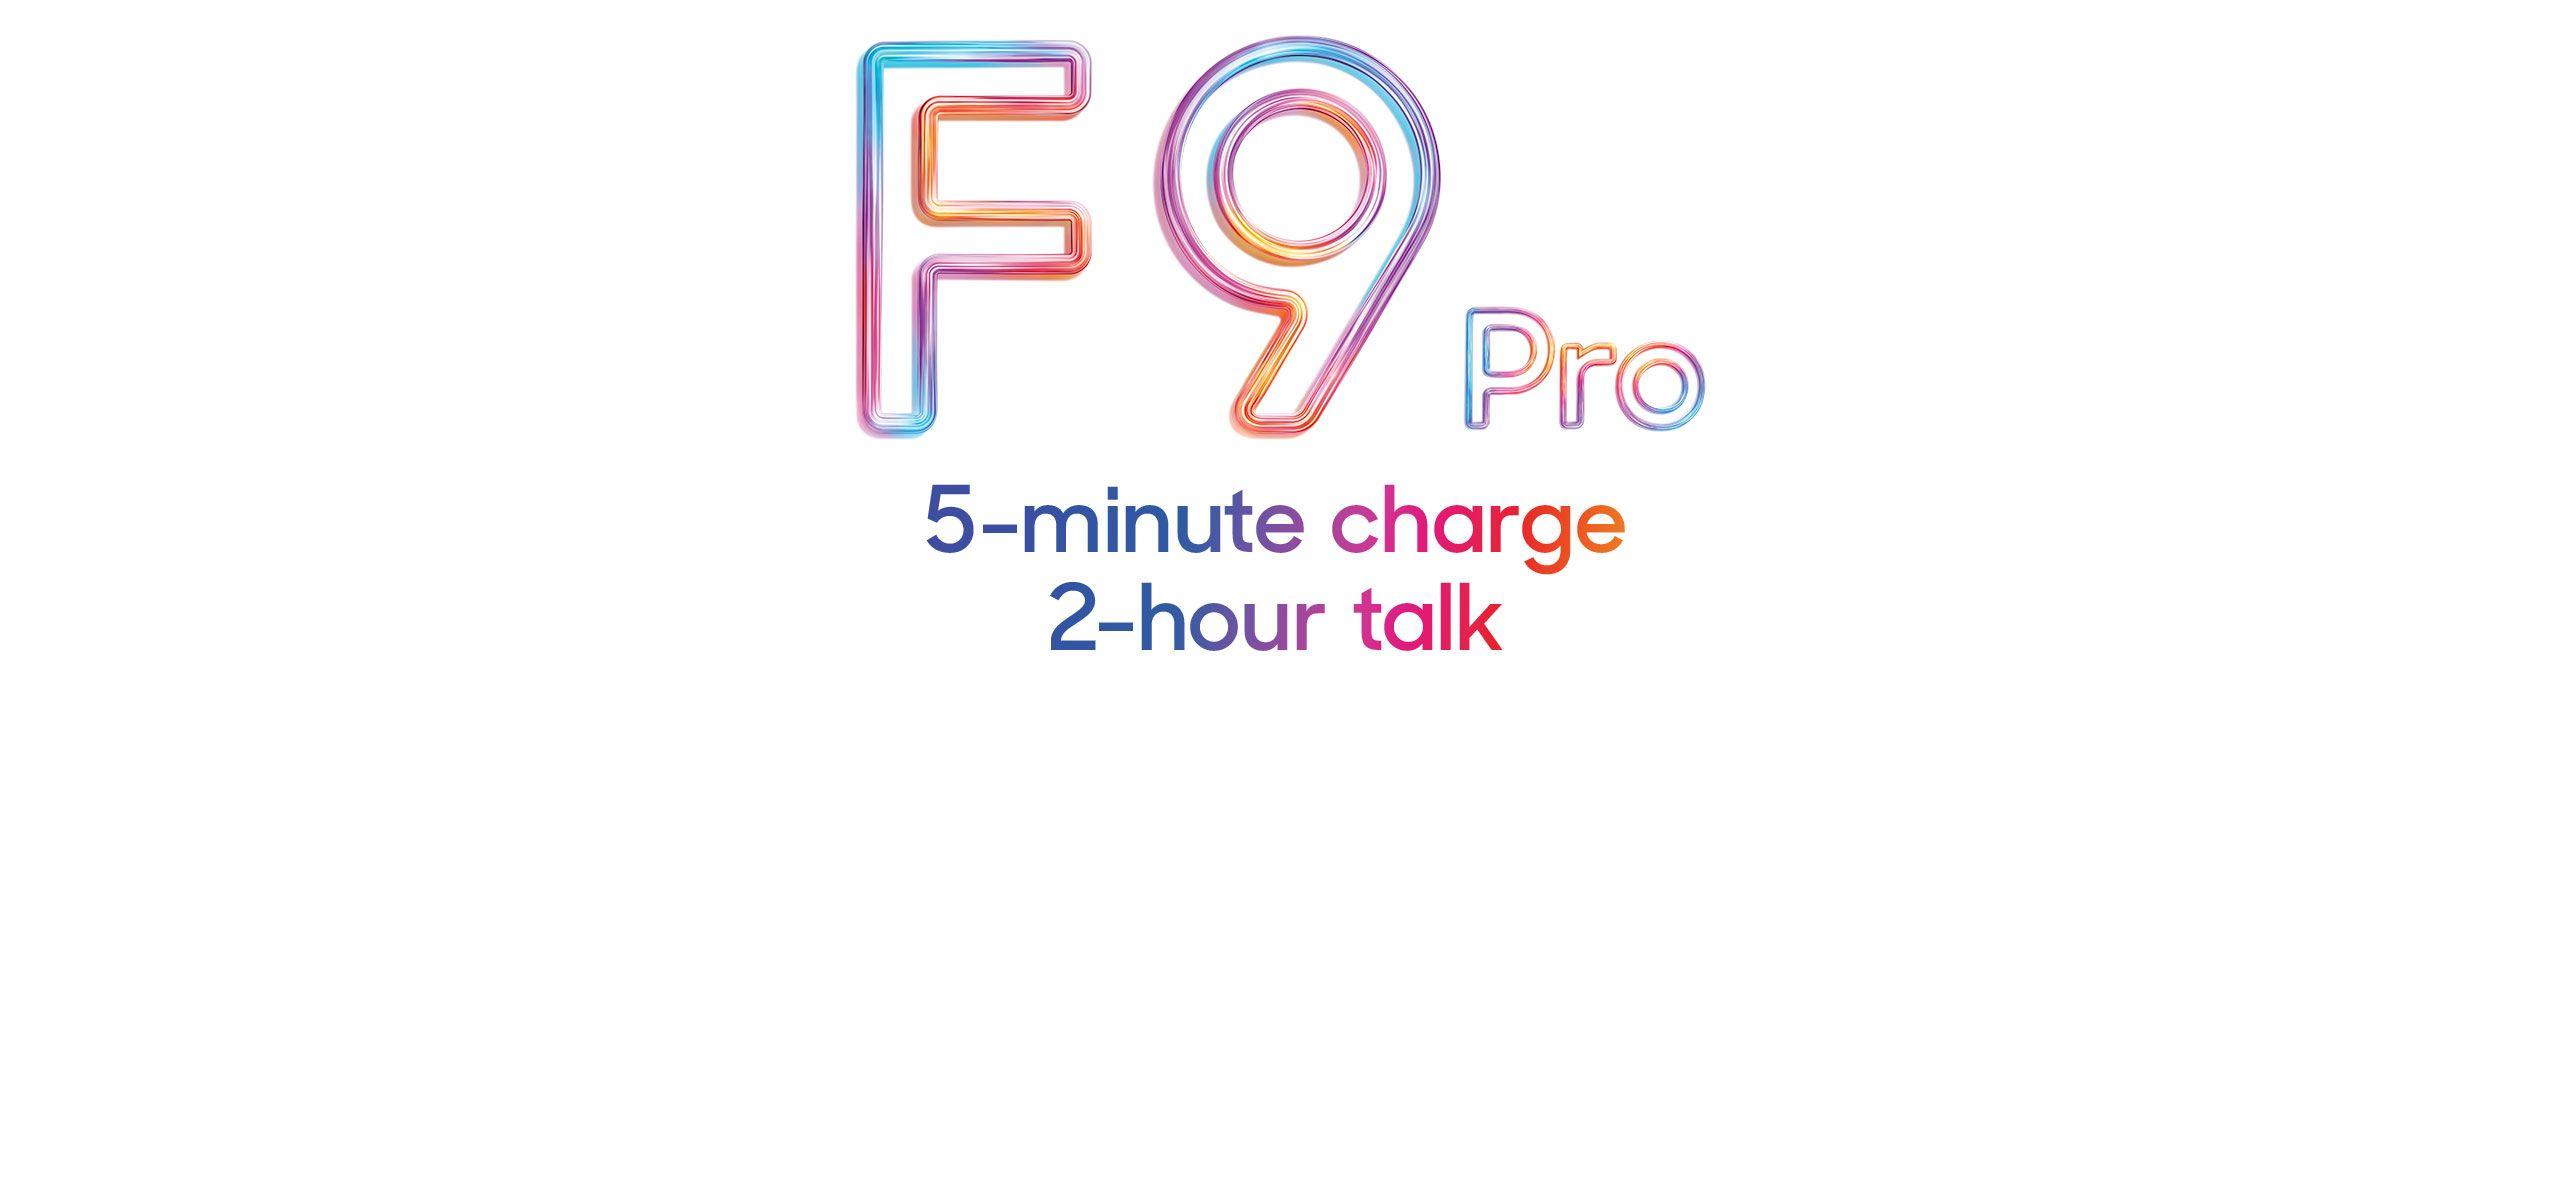 Oppo Phone Camera Logo - OPPO F9 Pro - 5 Minutes Charge for 2 Hours Talk | OPPO India